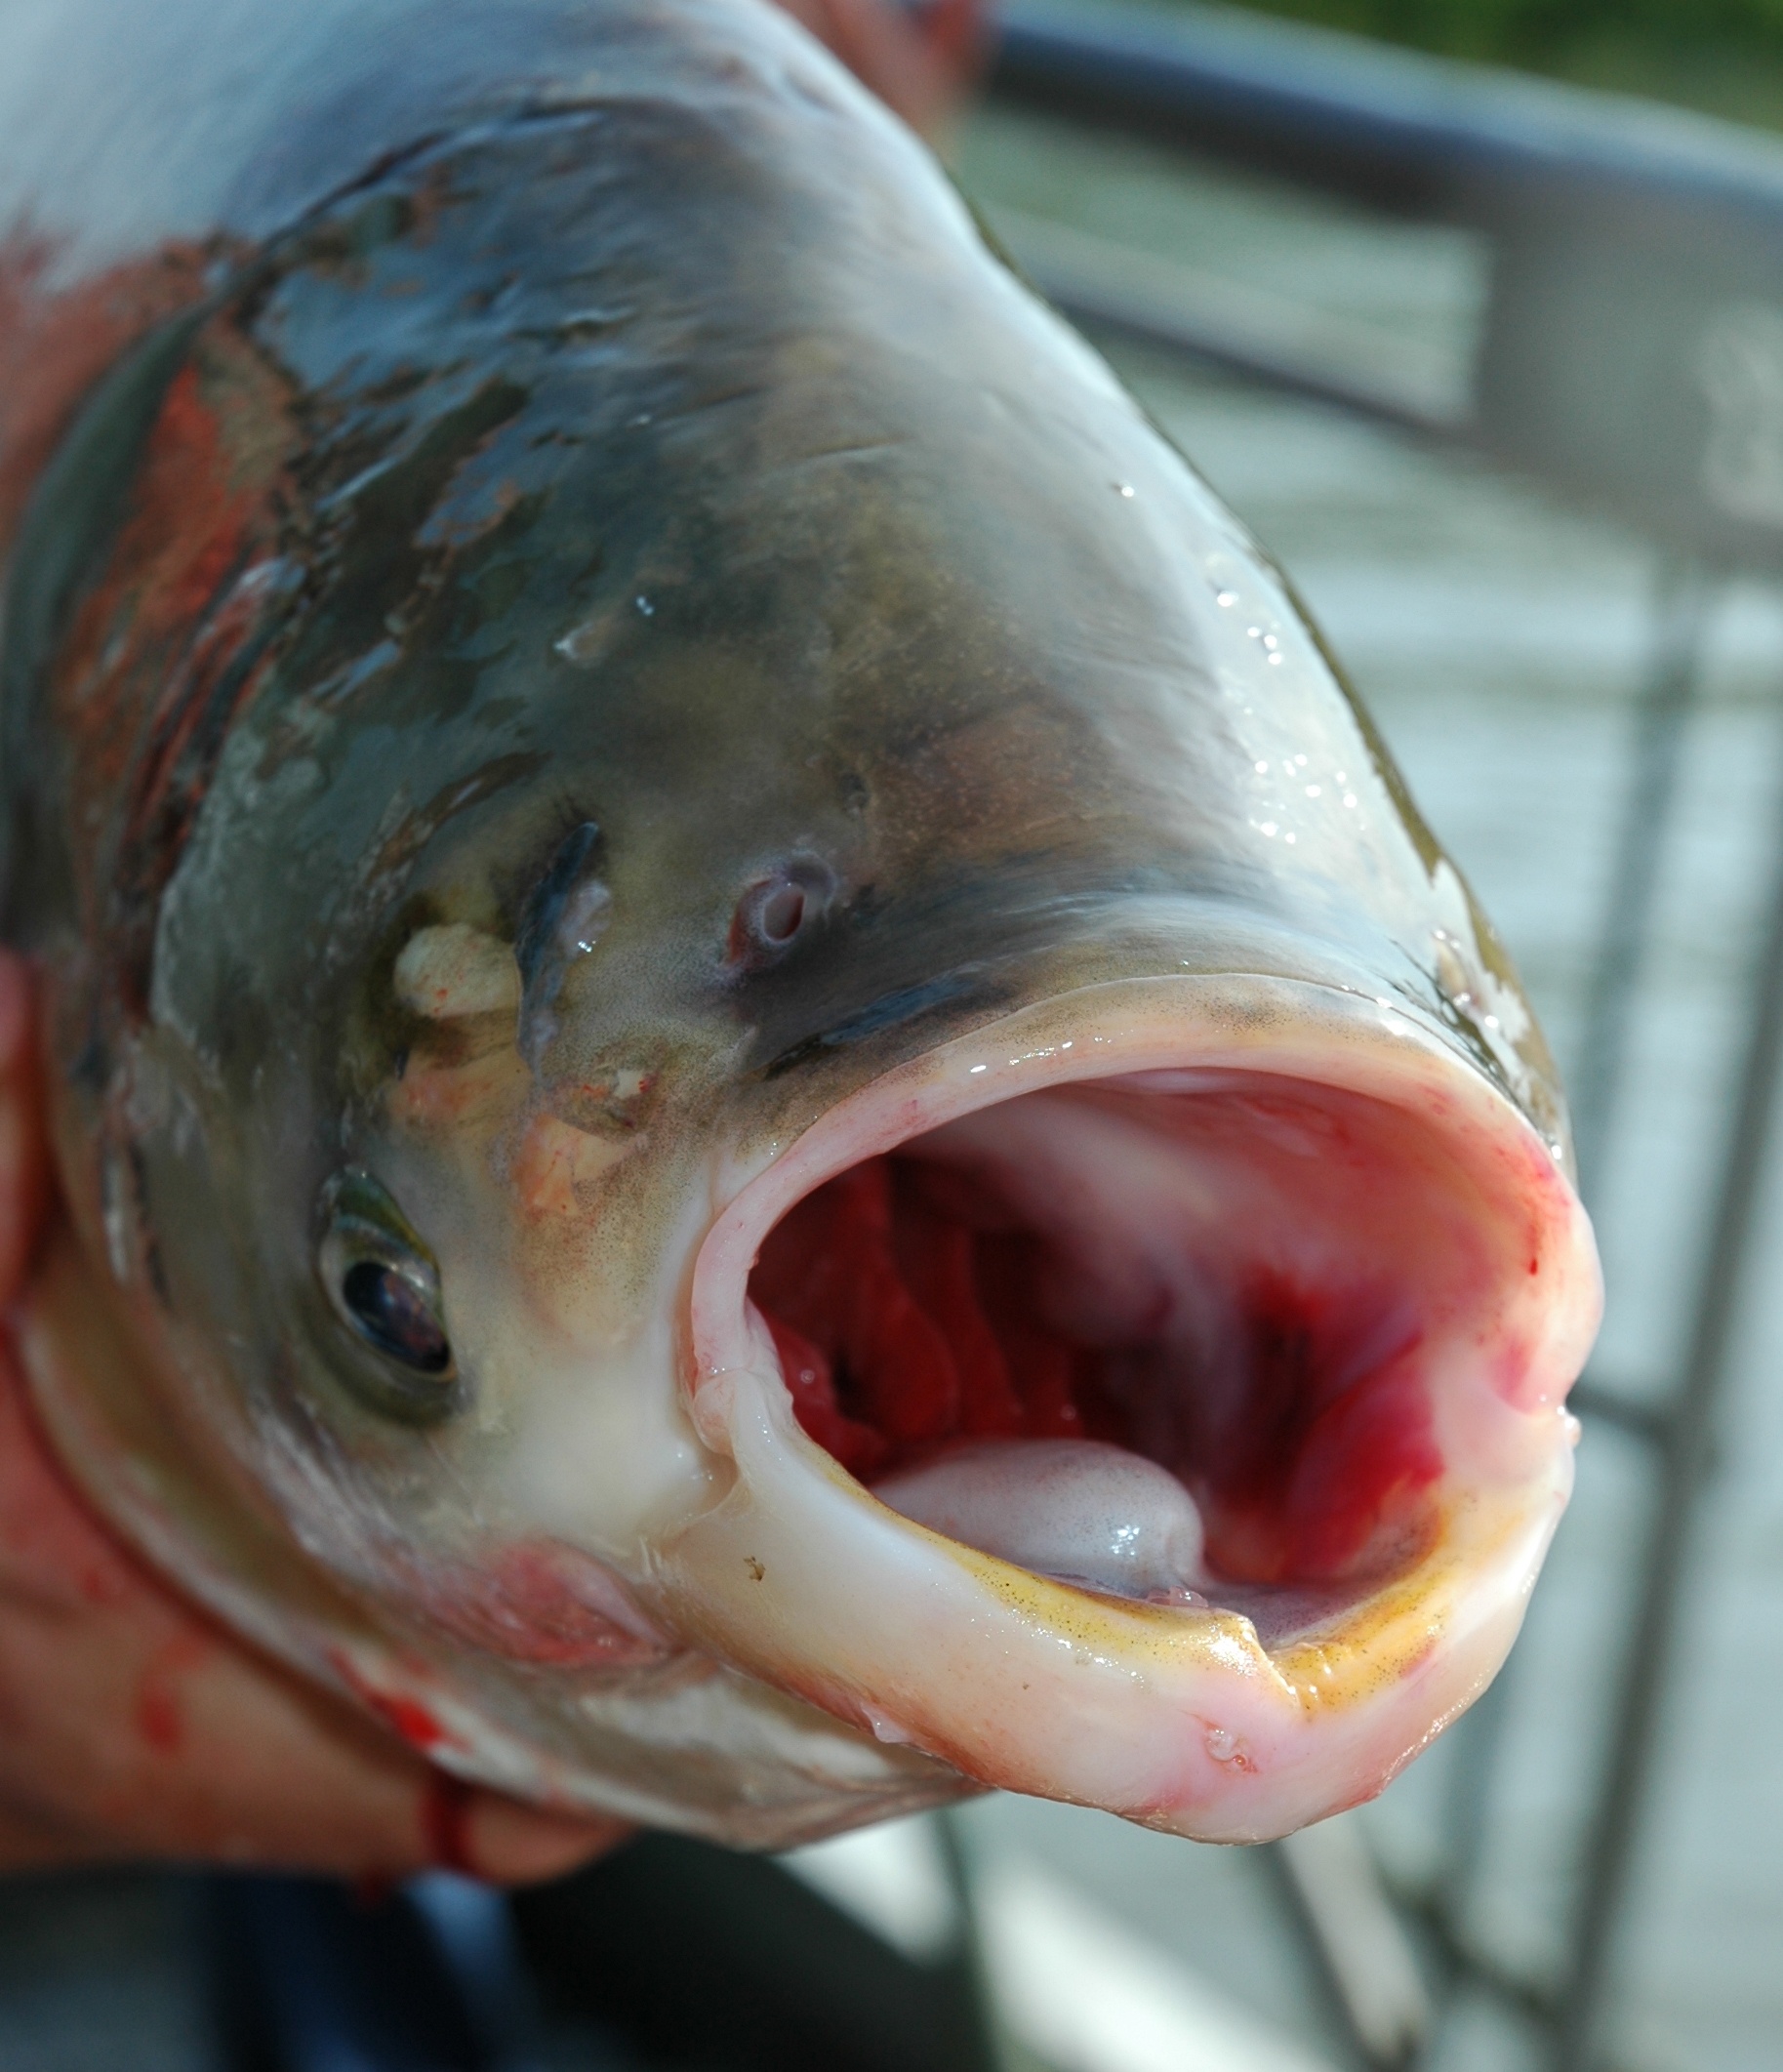 EPA official says feds are winning Asian carp war - The National